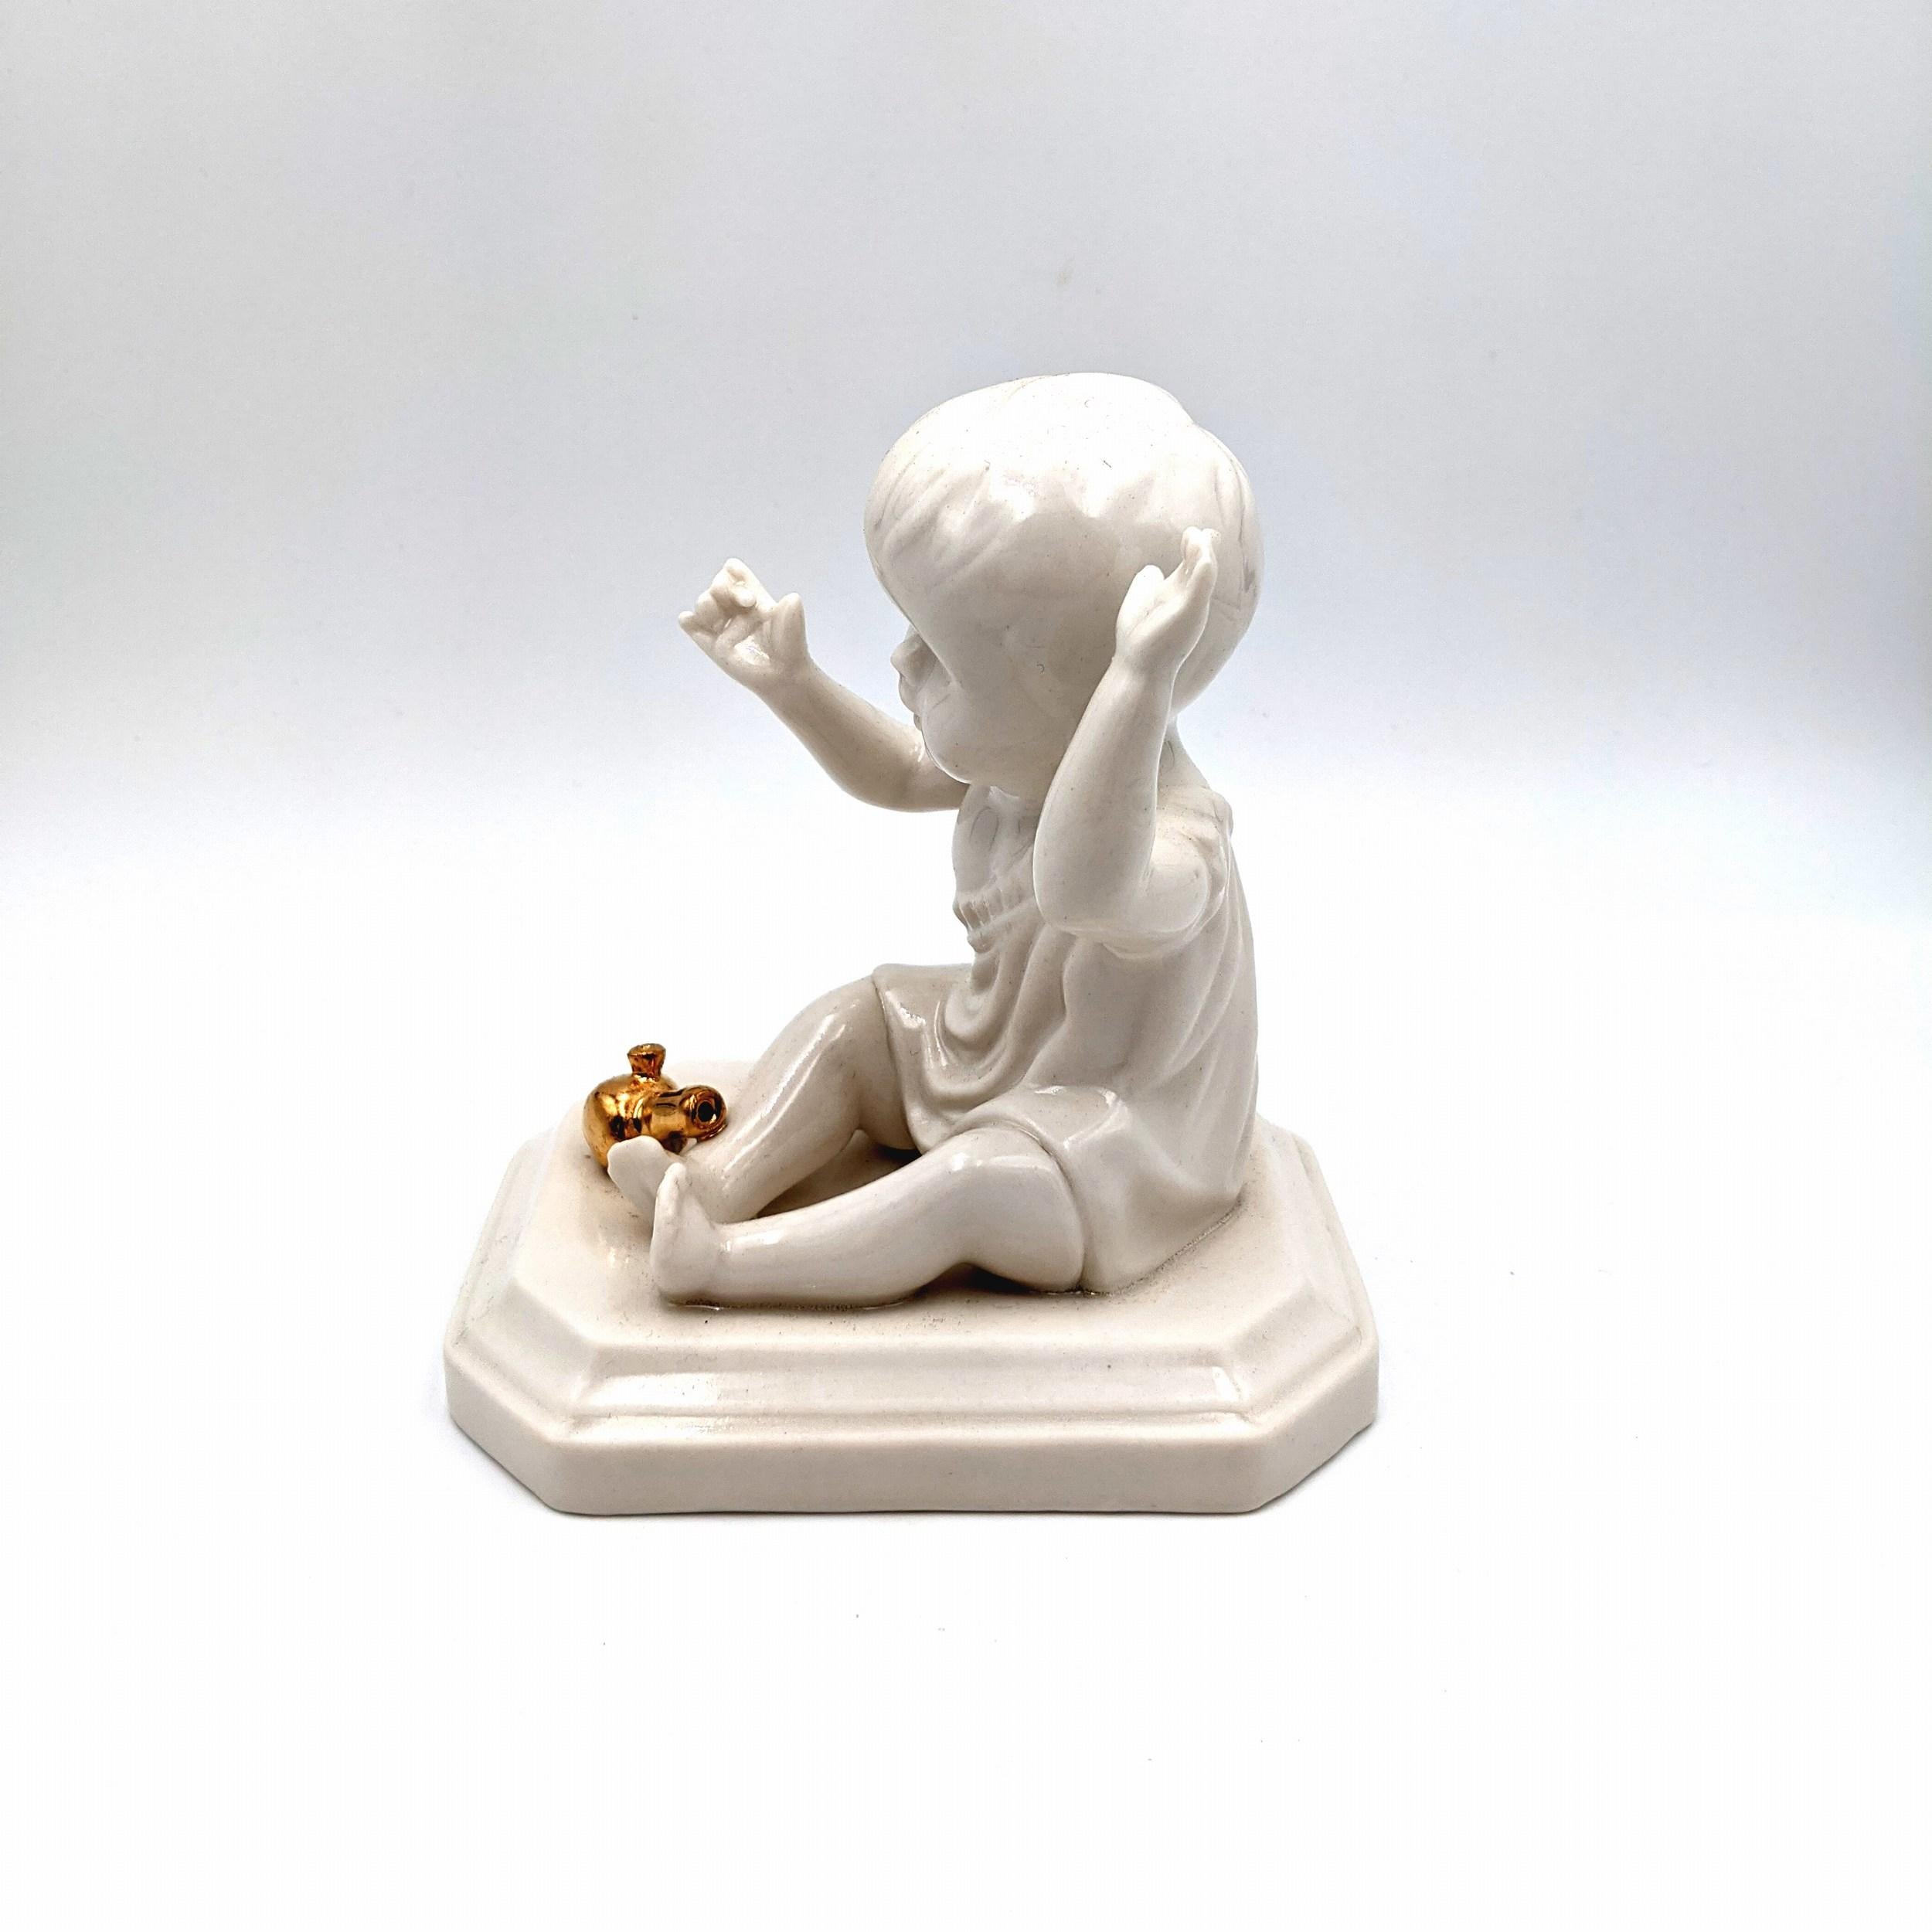 Jen Watson
Bong Baby
Year: 2019
Medium: Porcelain, Glaze, Luster 
Size: 5 x 4.5 x 3.5 inches
COA included

About Jen Watson:

My figurines exist somewhere between relic and homage, honoring the tradition of the figurine and subverting it. I think of